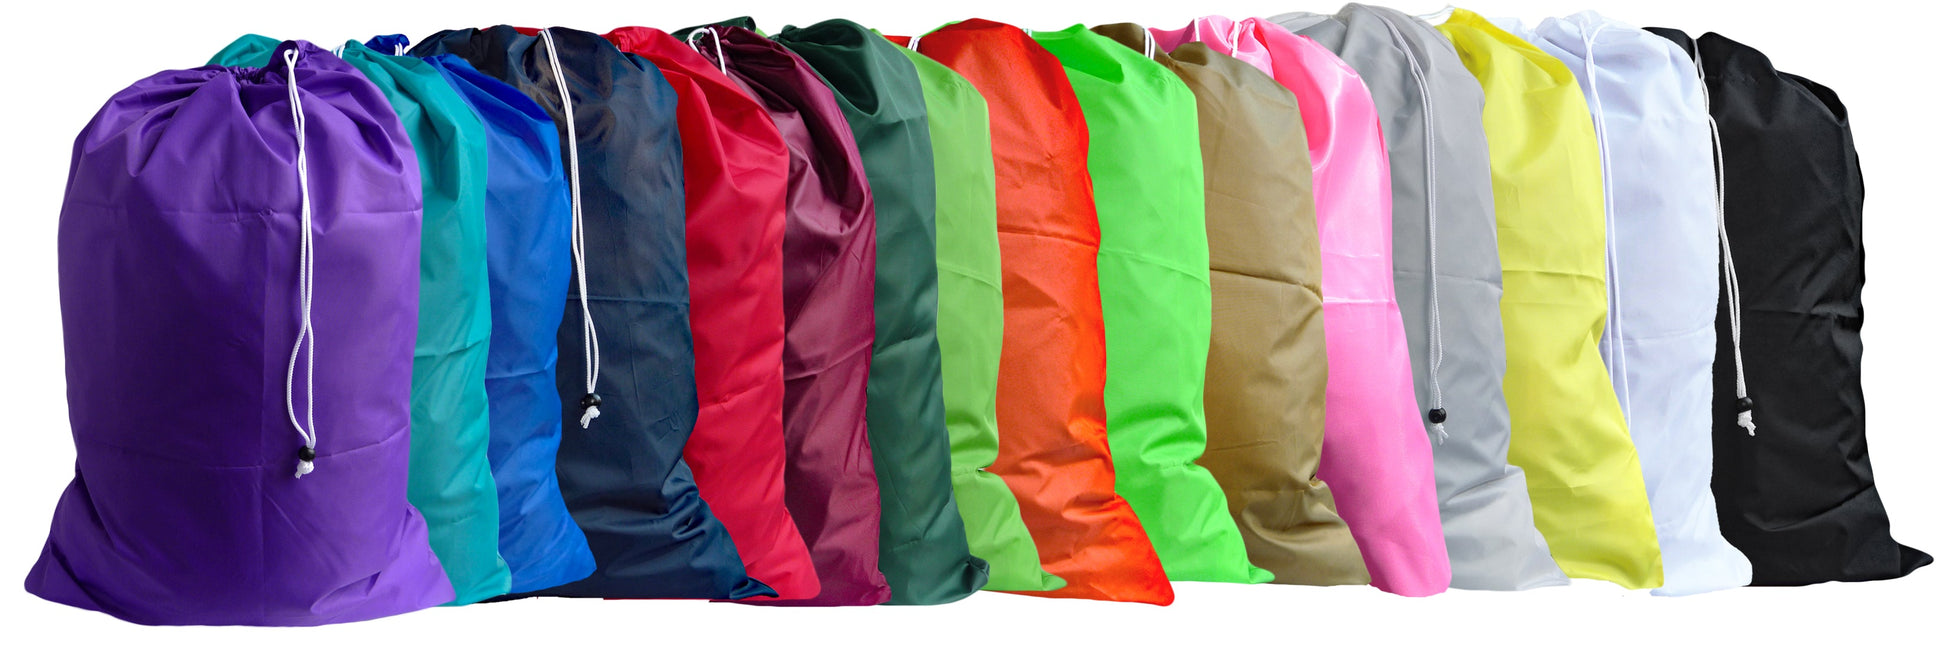 Assorted Color Laundry Bags, Large Size